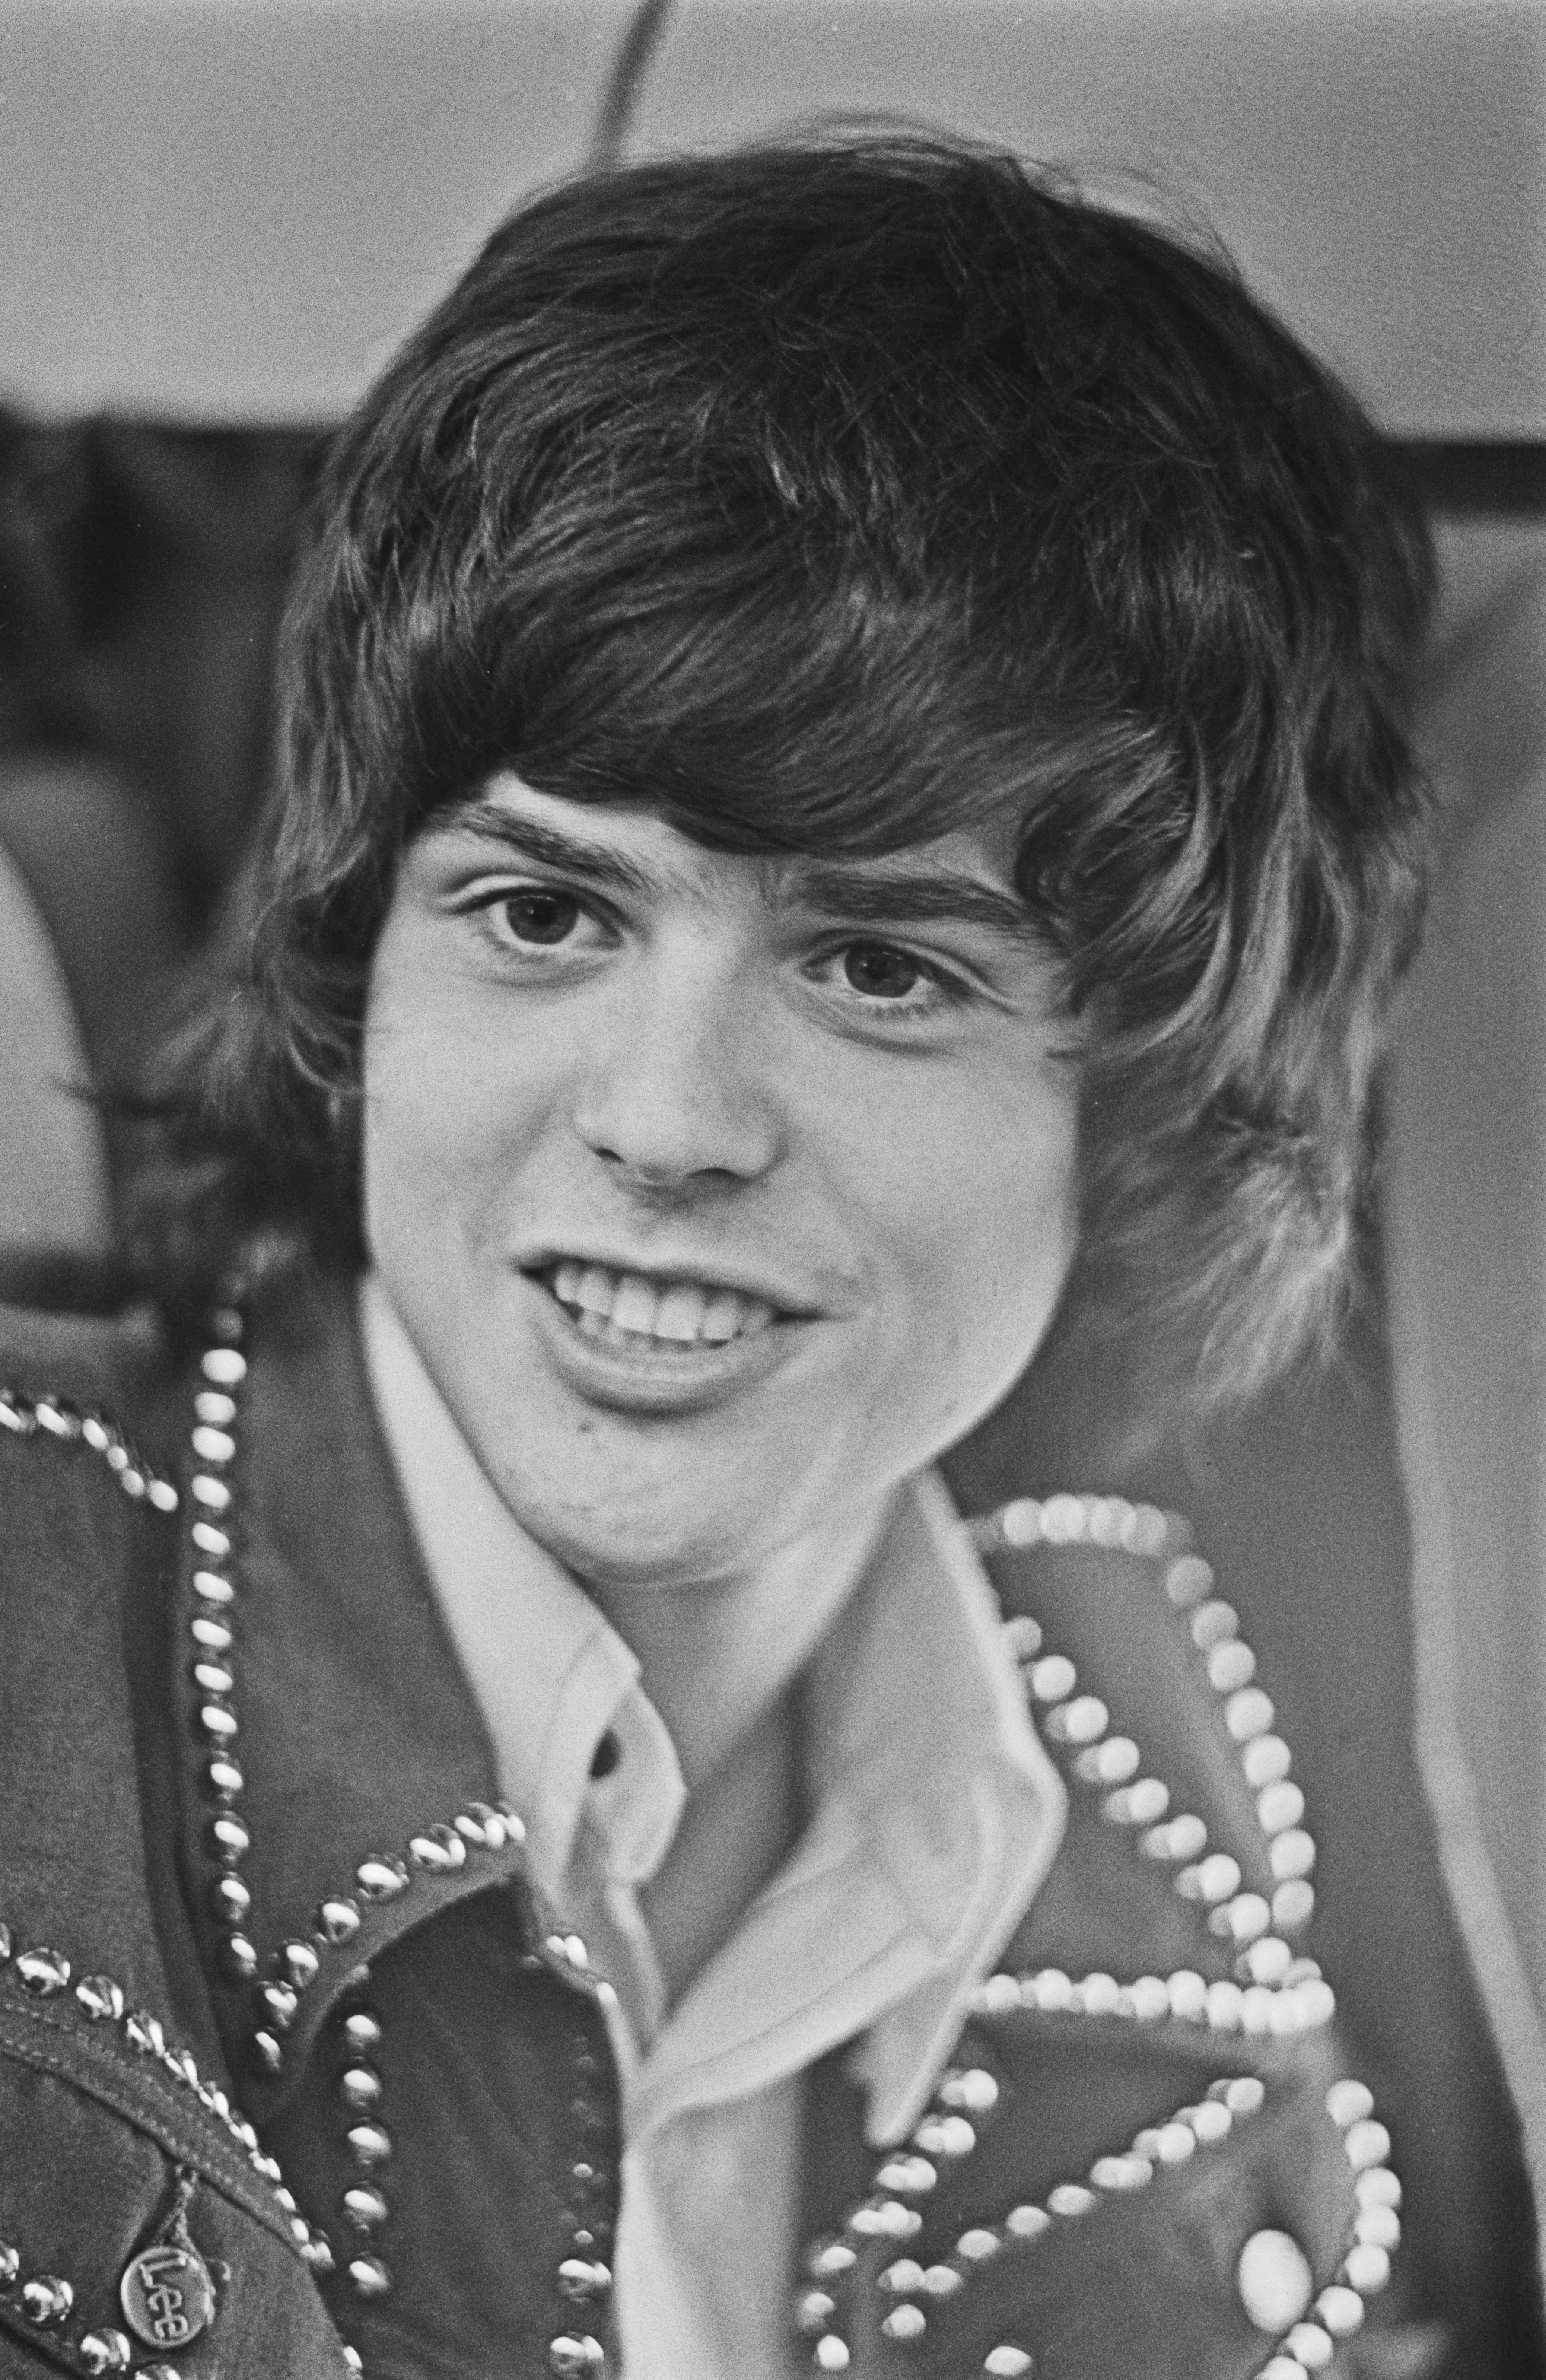 Actor Donny Osmond photographed on board an aircraft with his family in October 1973 in the United Kingdom. | Source: Getty Images